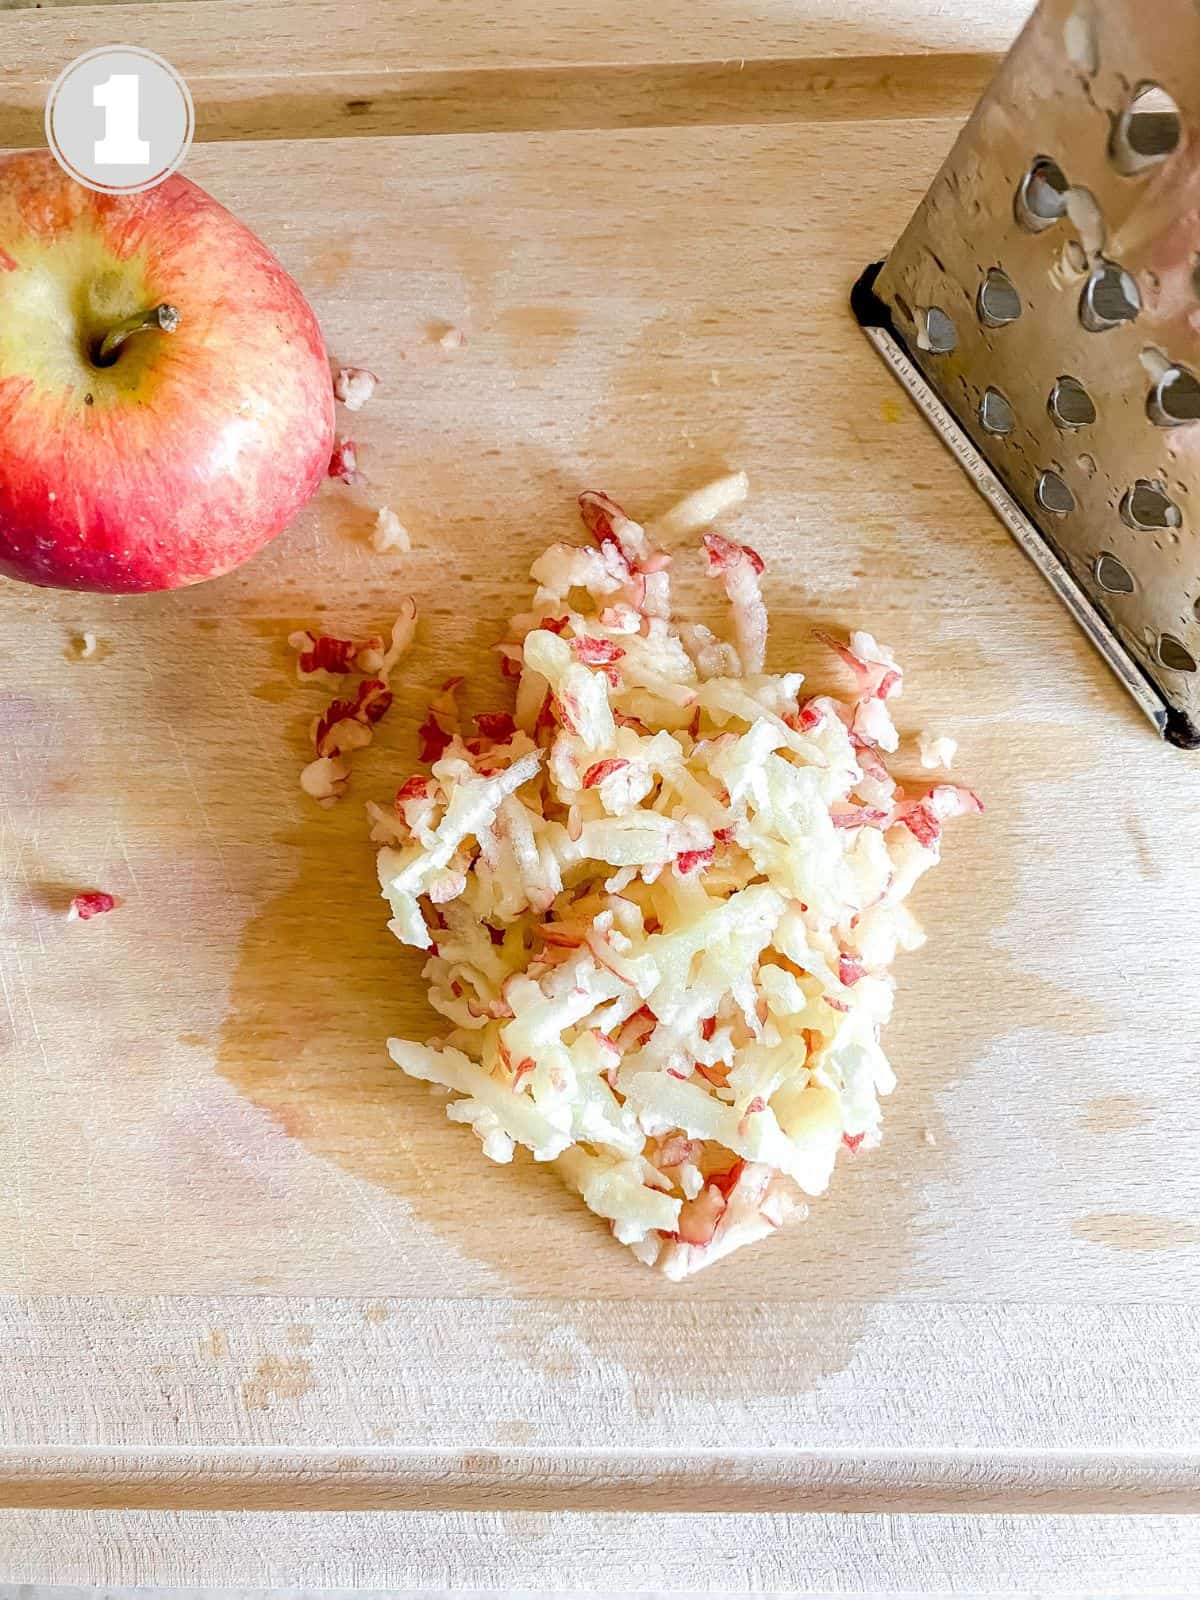 grated apple on a wooden board next to an apple and grater.